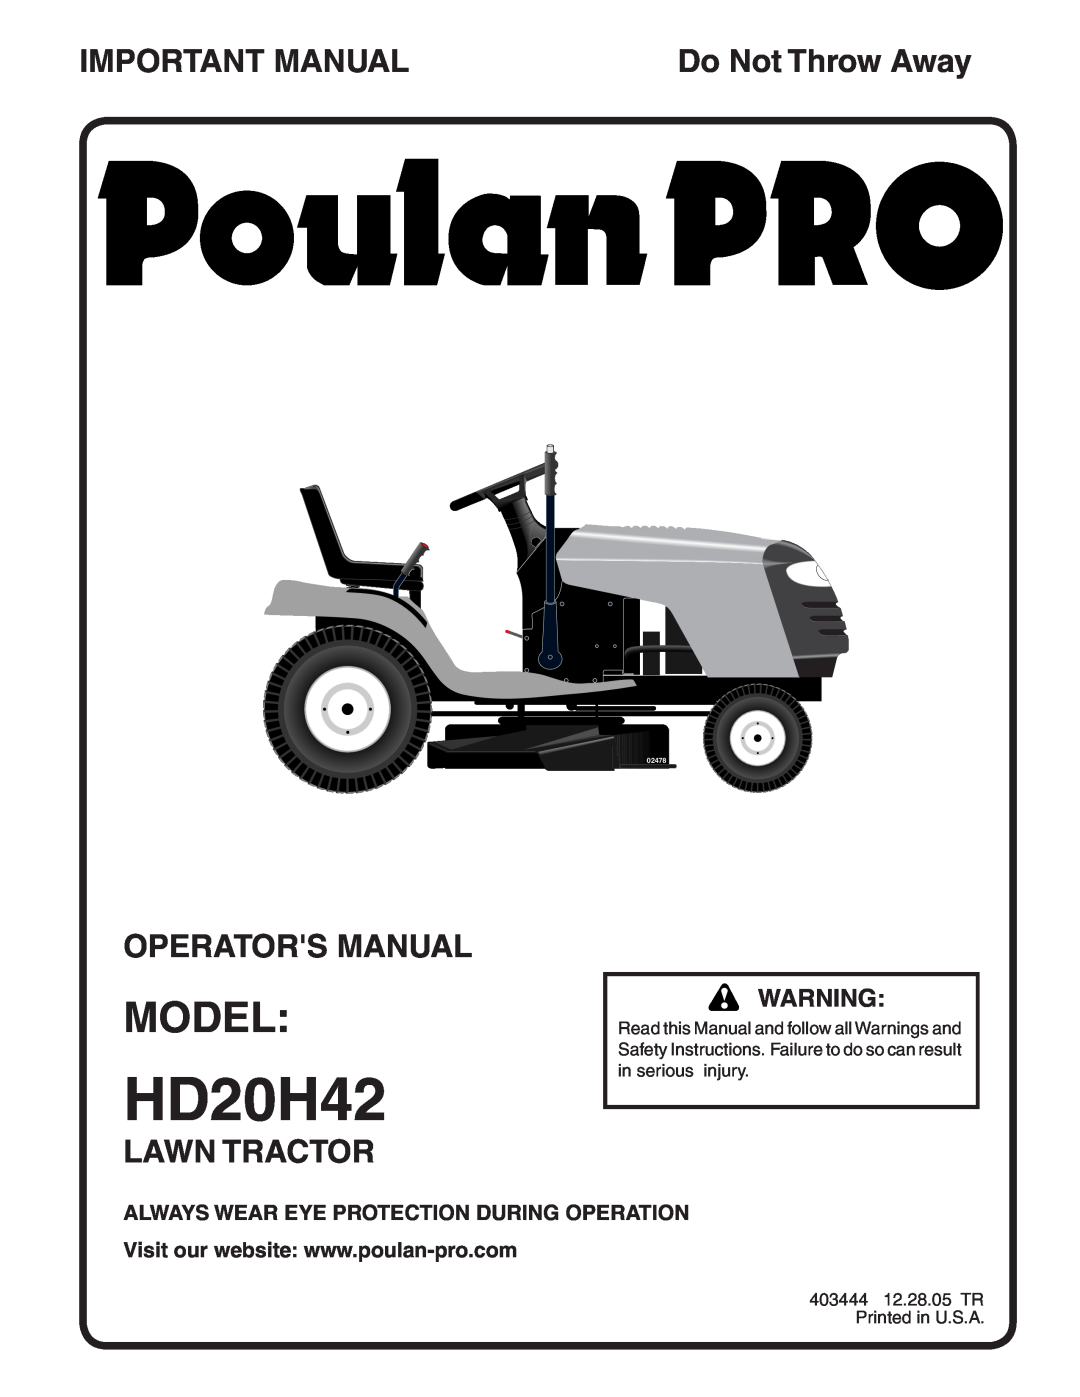 Poulan 403444 manual Model, Important Manual, Operators Manual, Lawn Tractor, Always Wear Eye Protection During Operation 